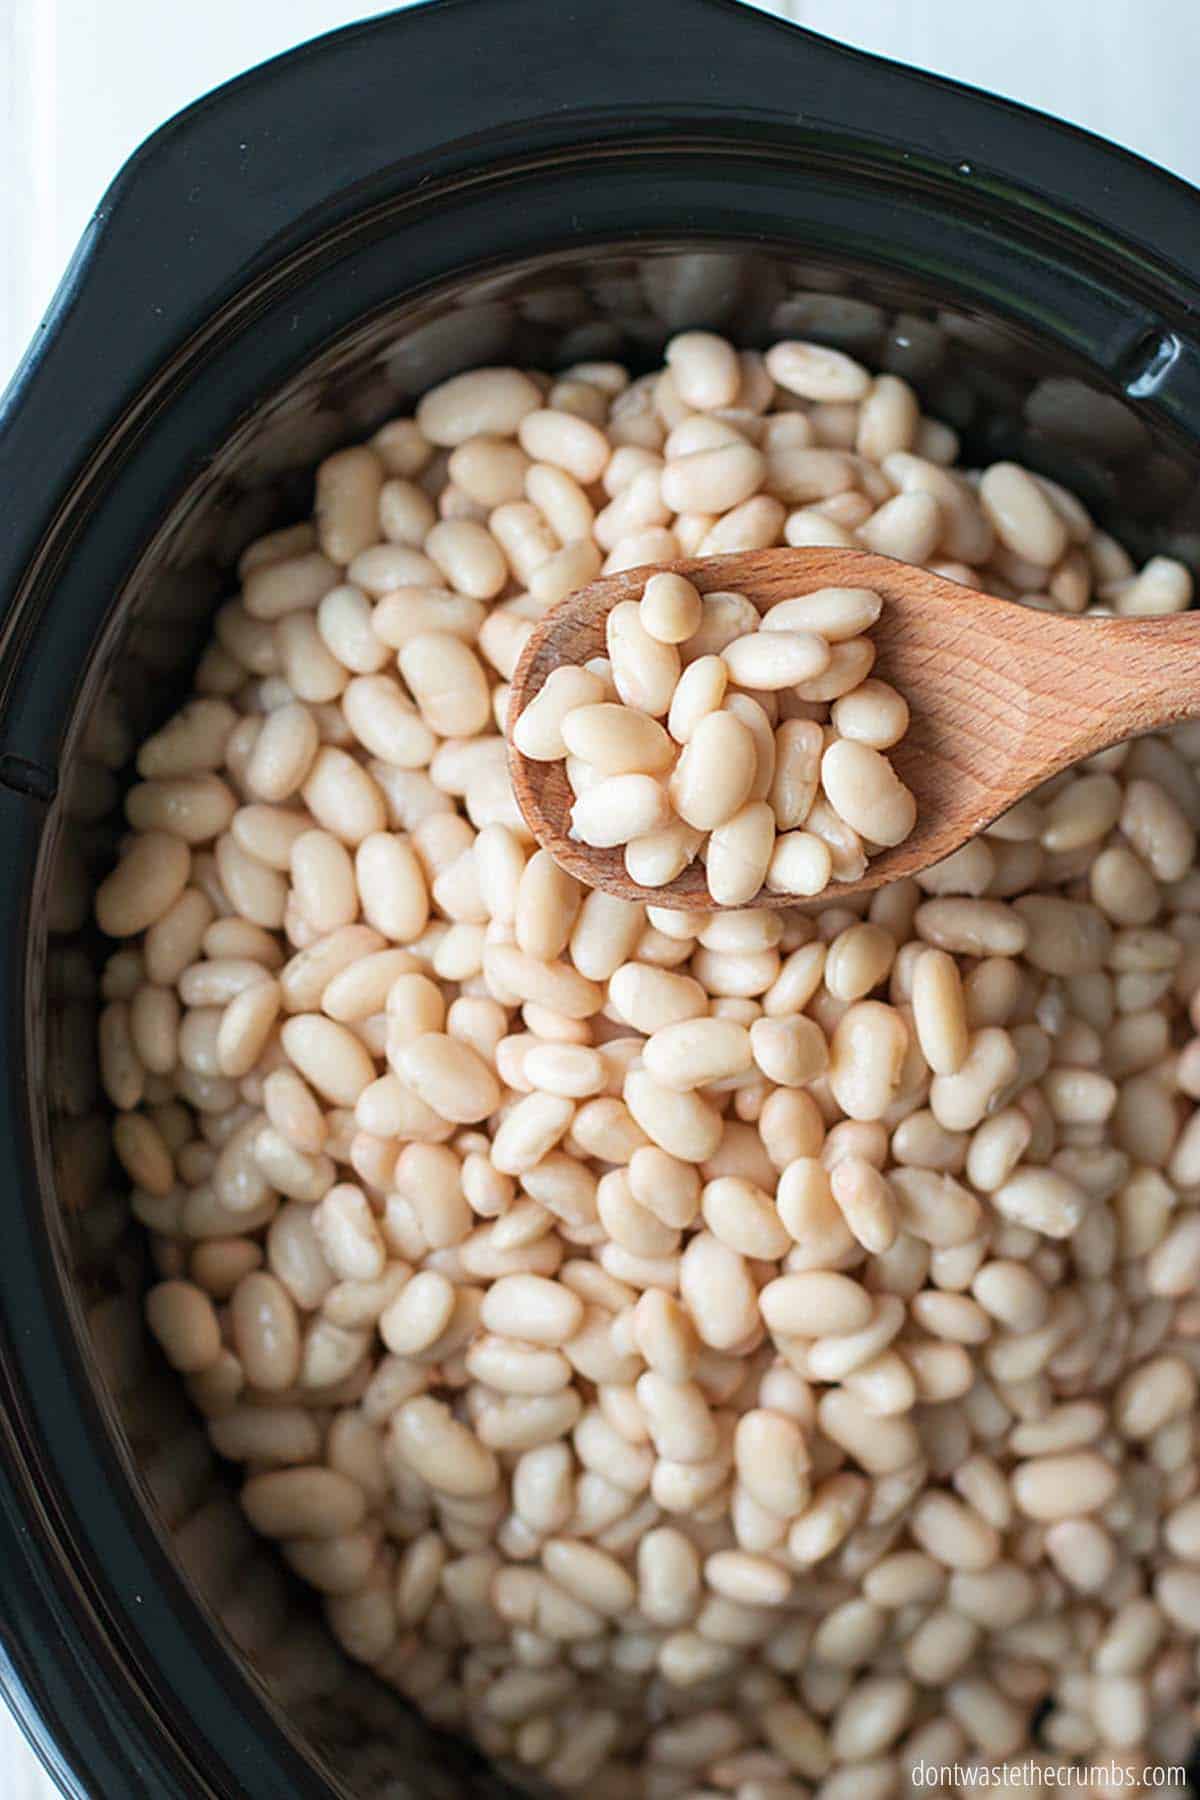 A black slow cooker is filled to the top with cooked white beans. A wooden spoon is serving a heaping pile of beans.